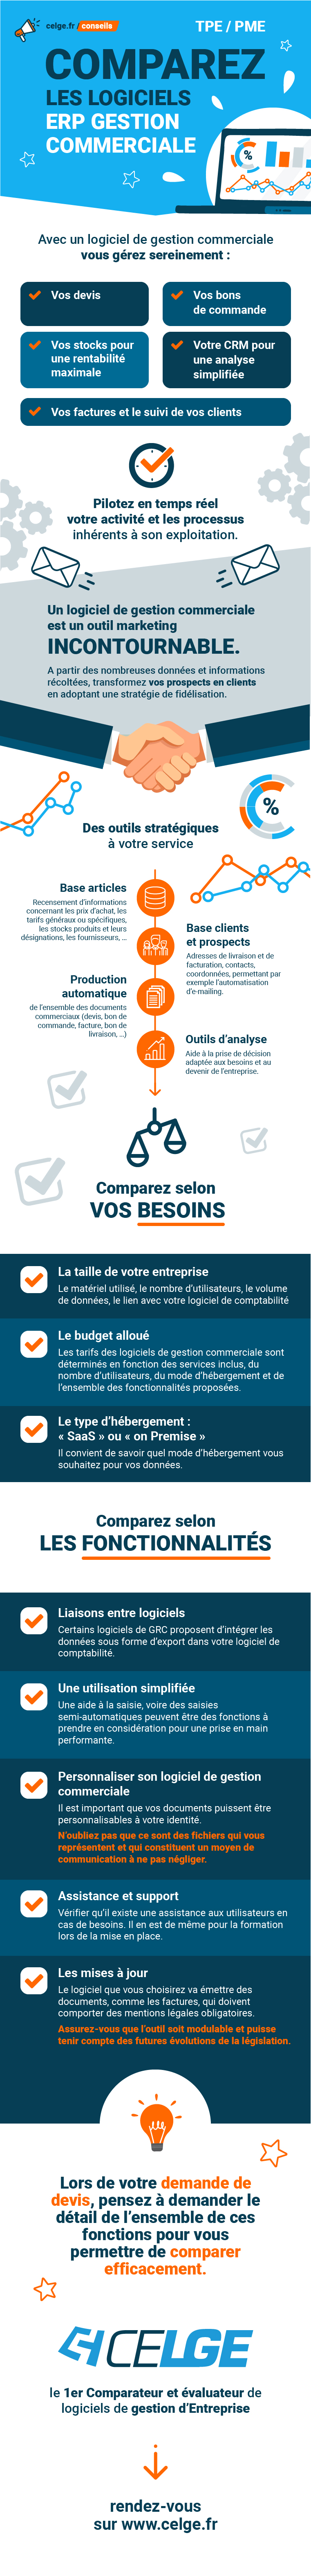 Infographie gestion commerciale